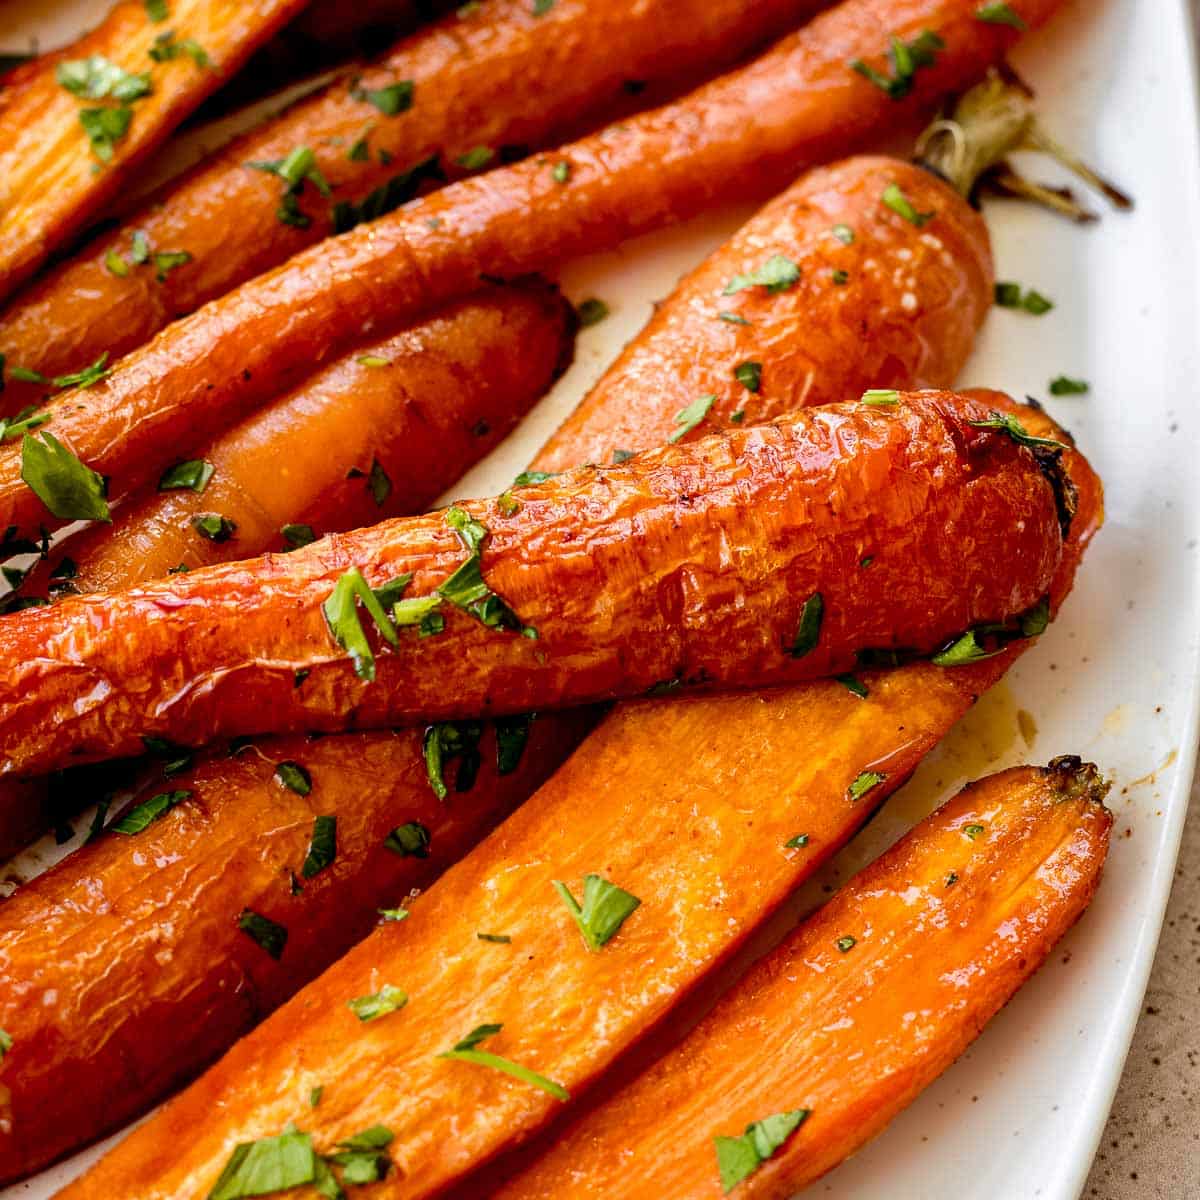 Image of maple roasted carrots on white plate.